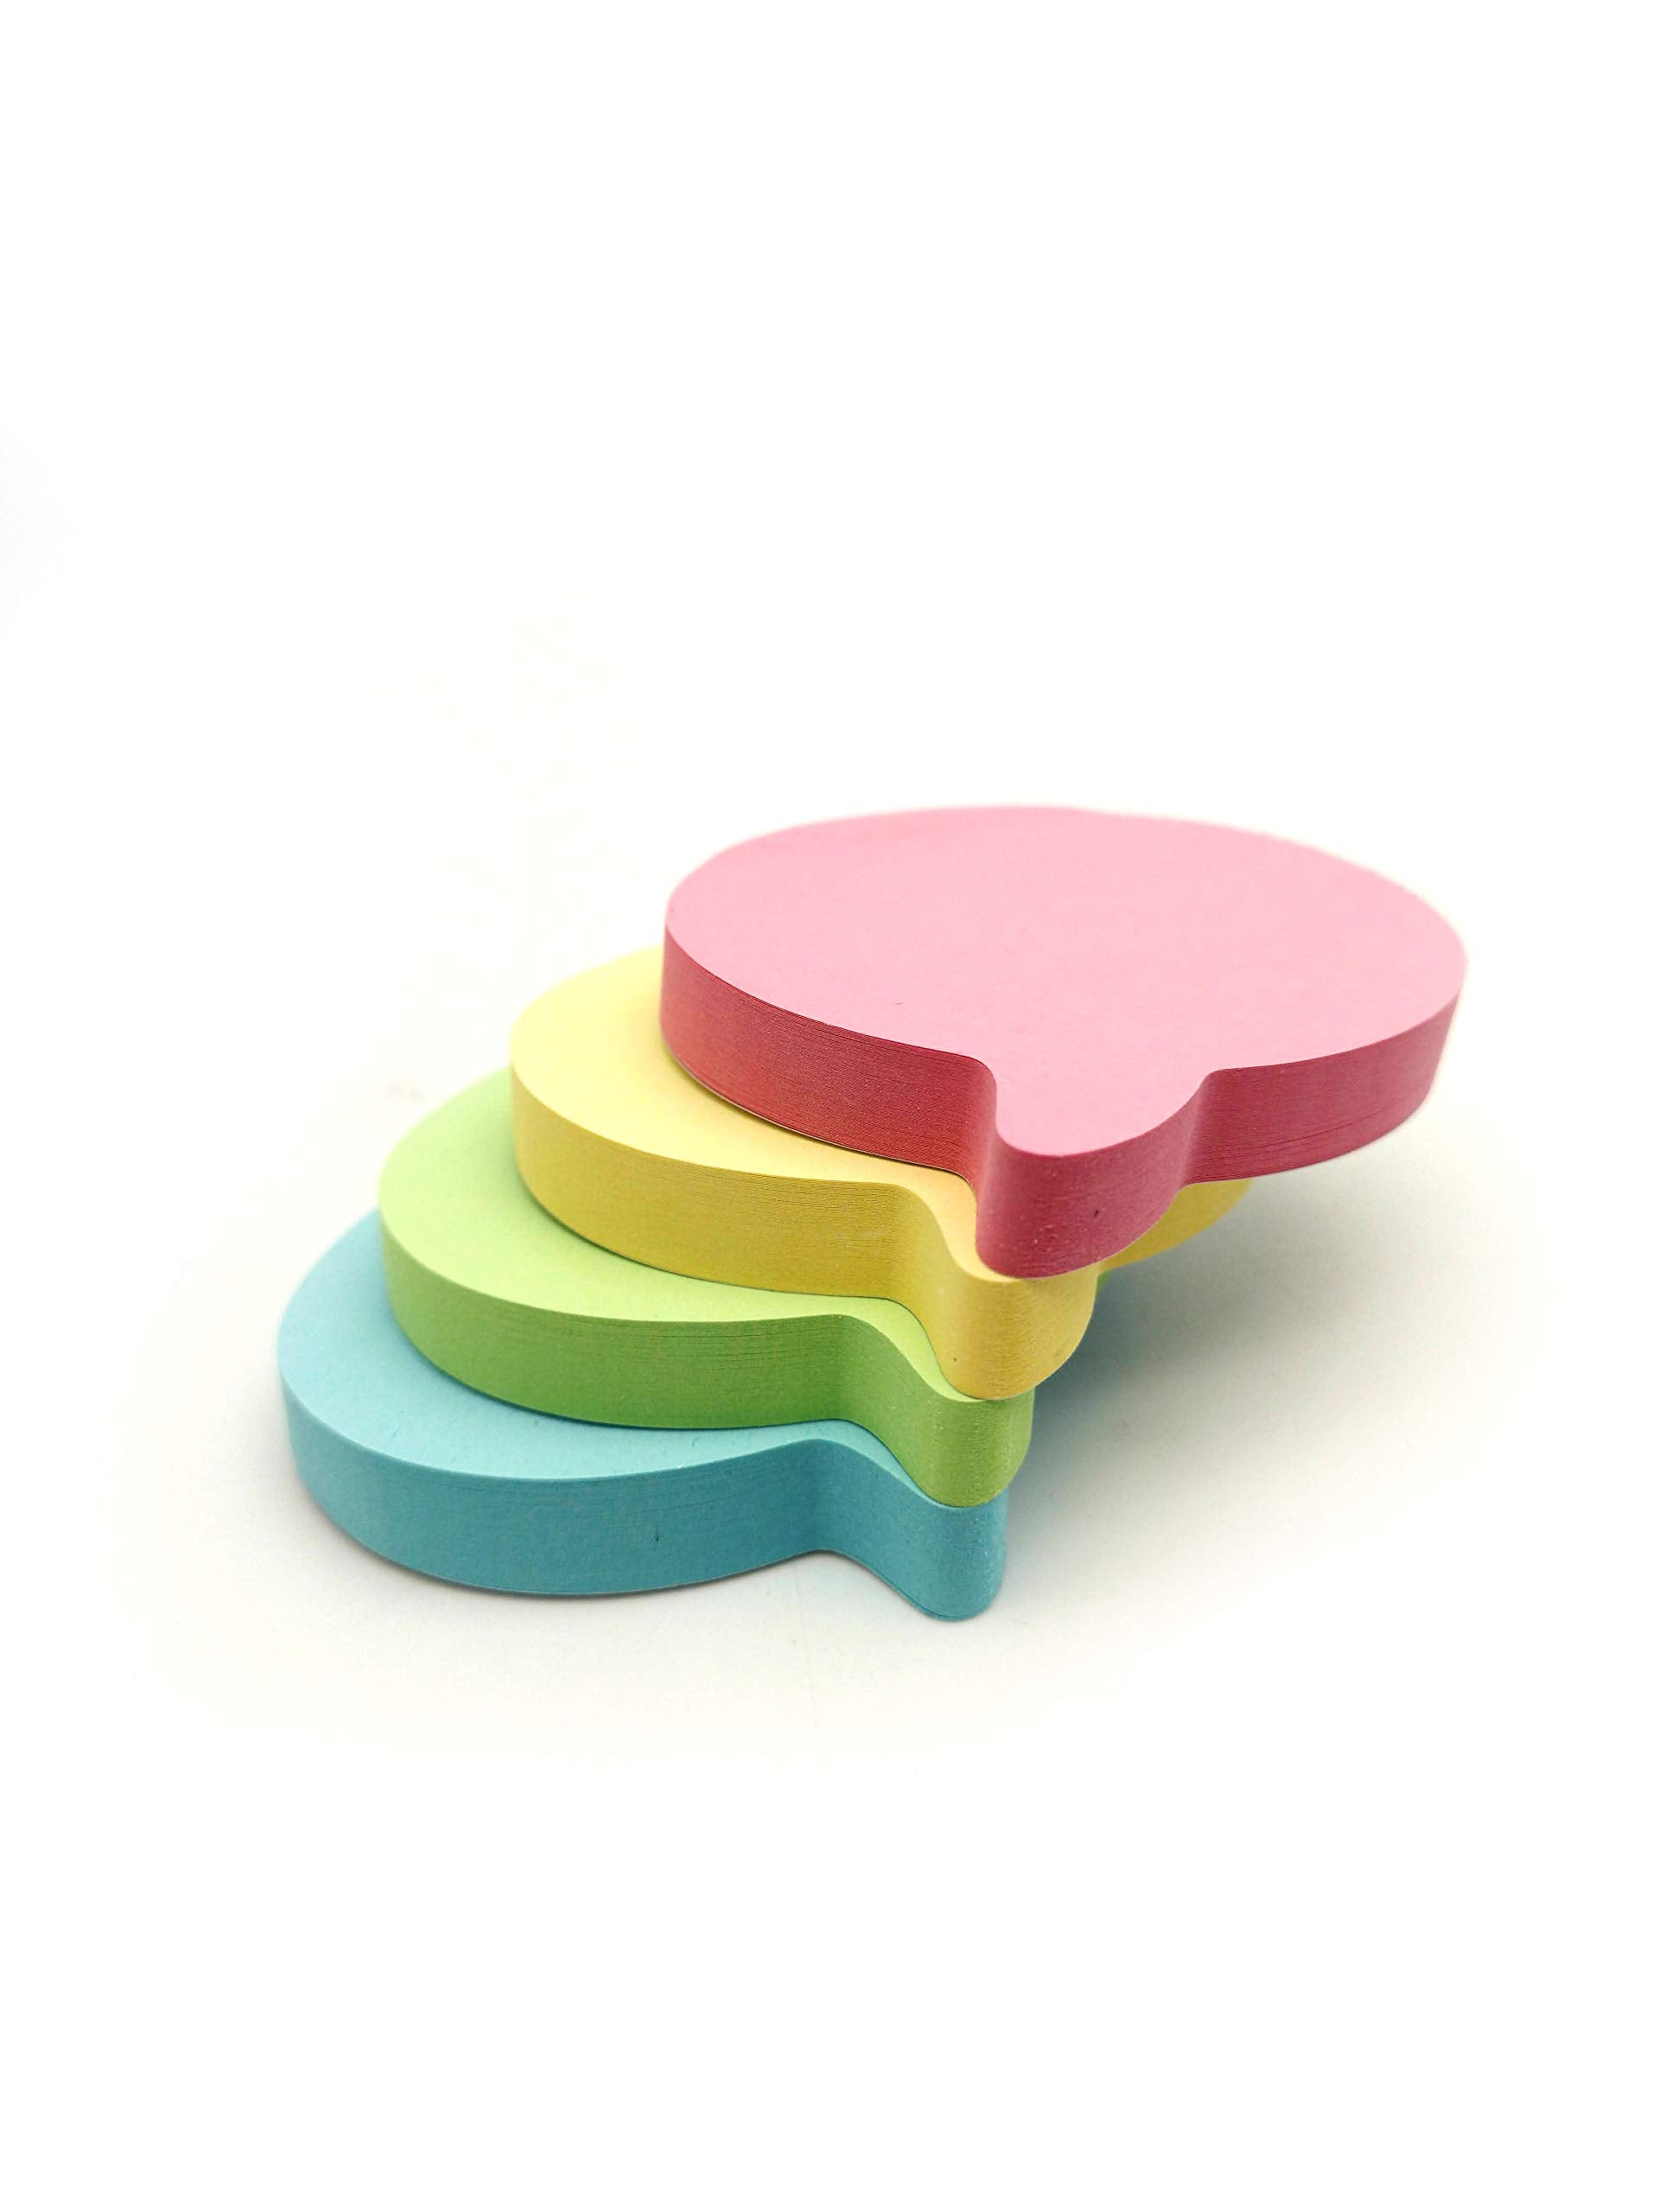 400 Speech Bubble Shaped Sticky Notes - Pastel Colours (76x76mm) - Colourful Removable Memo Pads in Blue, Pink, Green, Yellow   Set of 4 Pads (100 Sheets Each)   Office, Home & School Use - 4 Packs